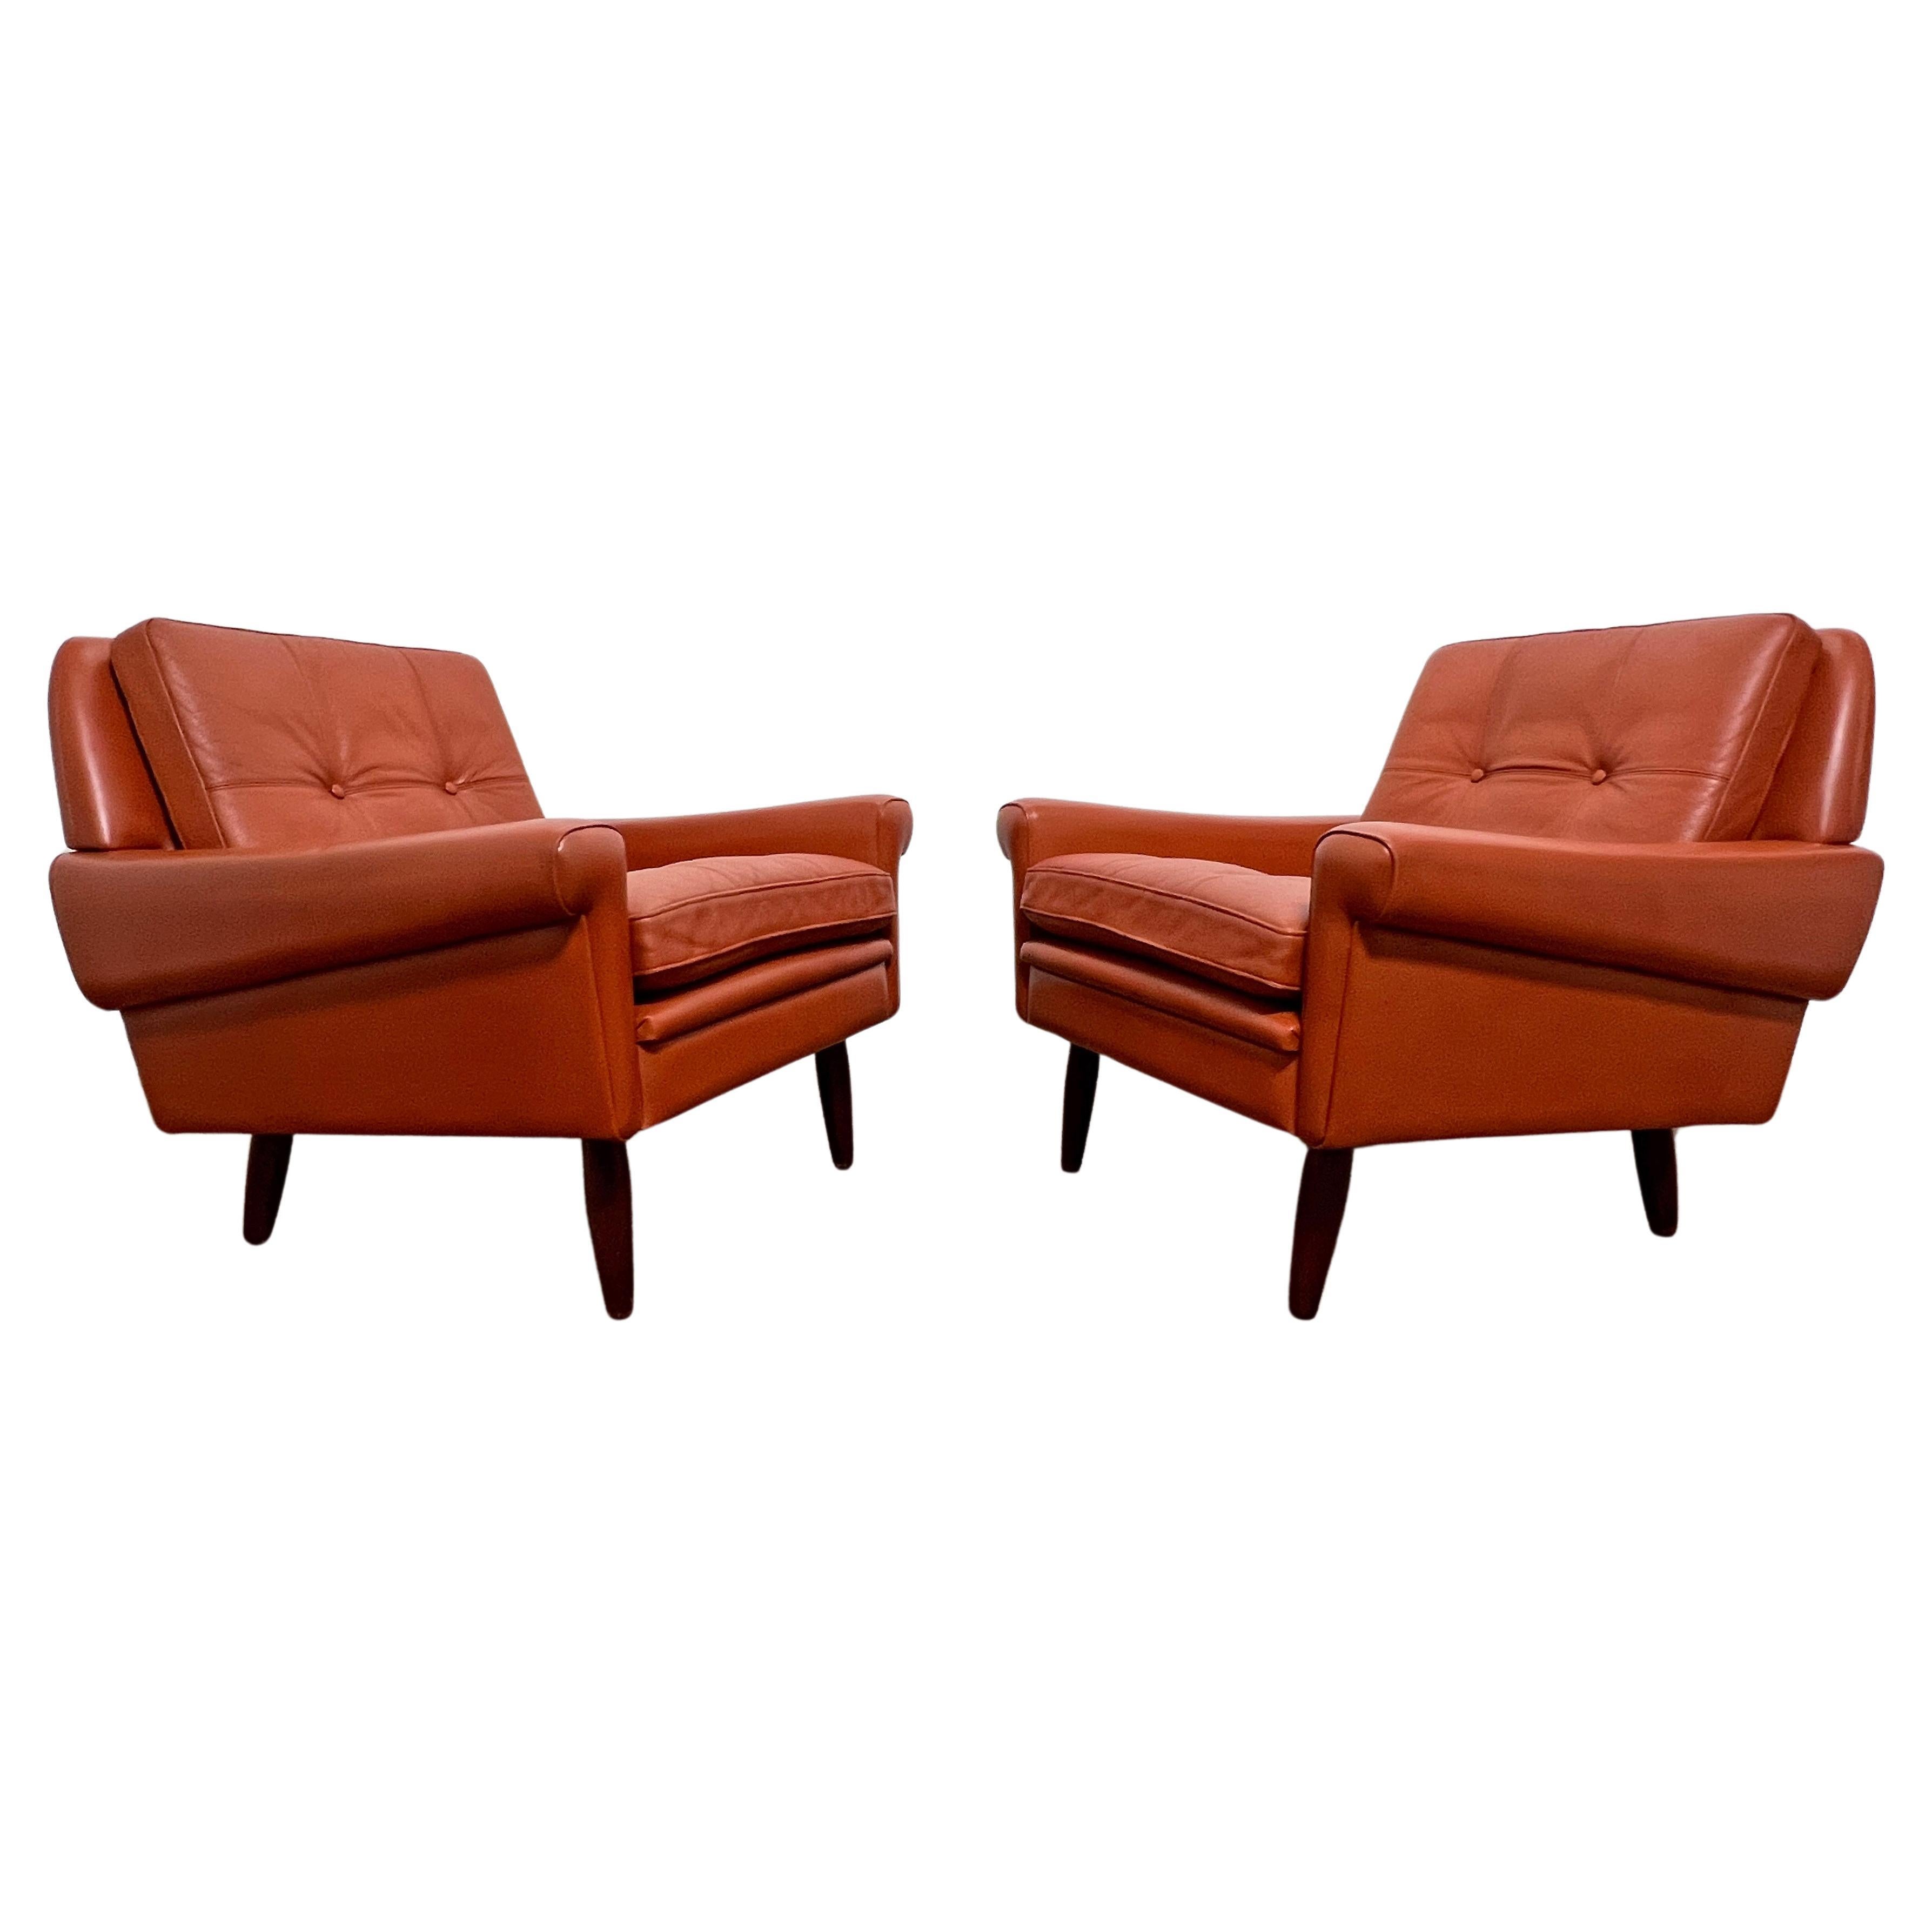 Pair of Danish Leather Lounge Chairs by Svend Skipper, Circa 1960s For Sale